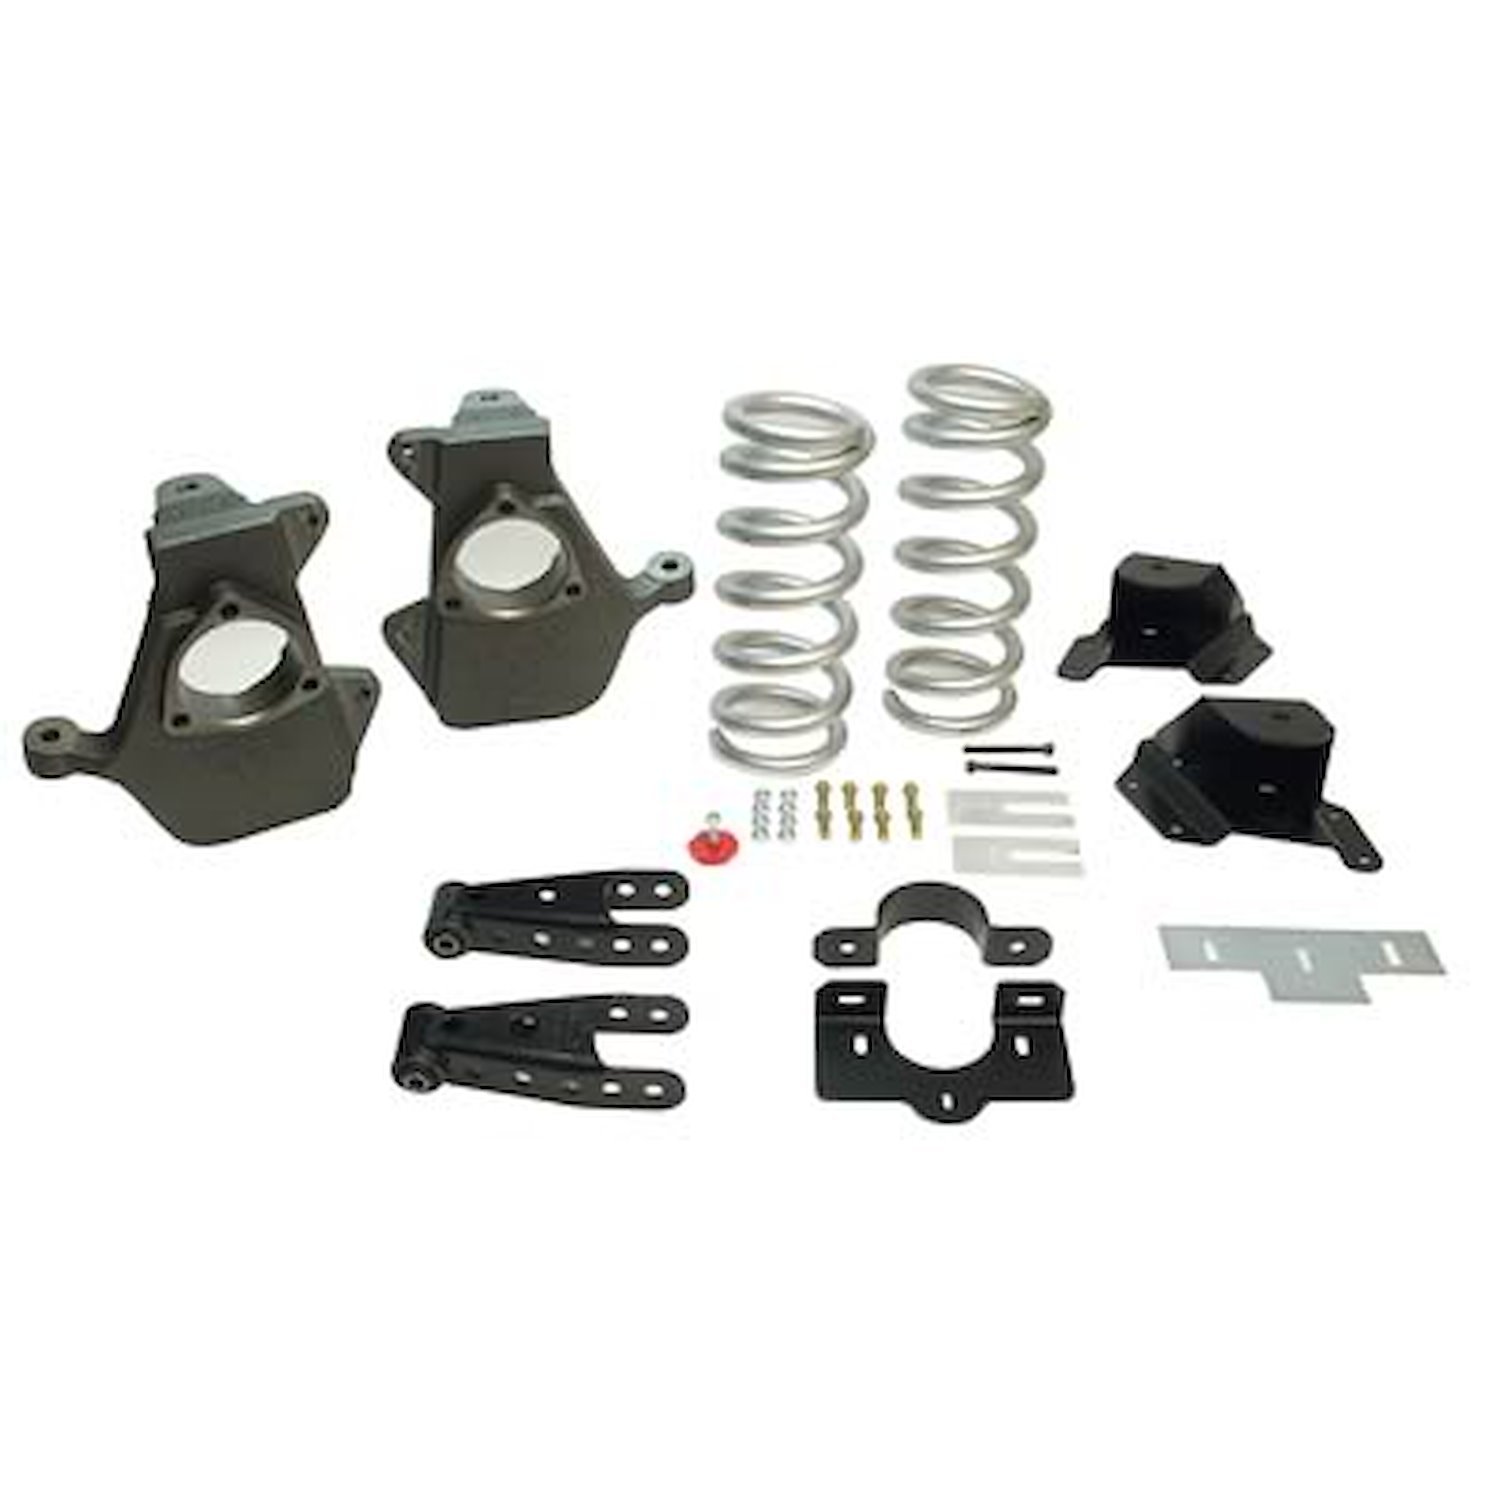 Complete Lowering Kit for 1995-2002 Chevy Astro/GMC Safari